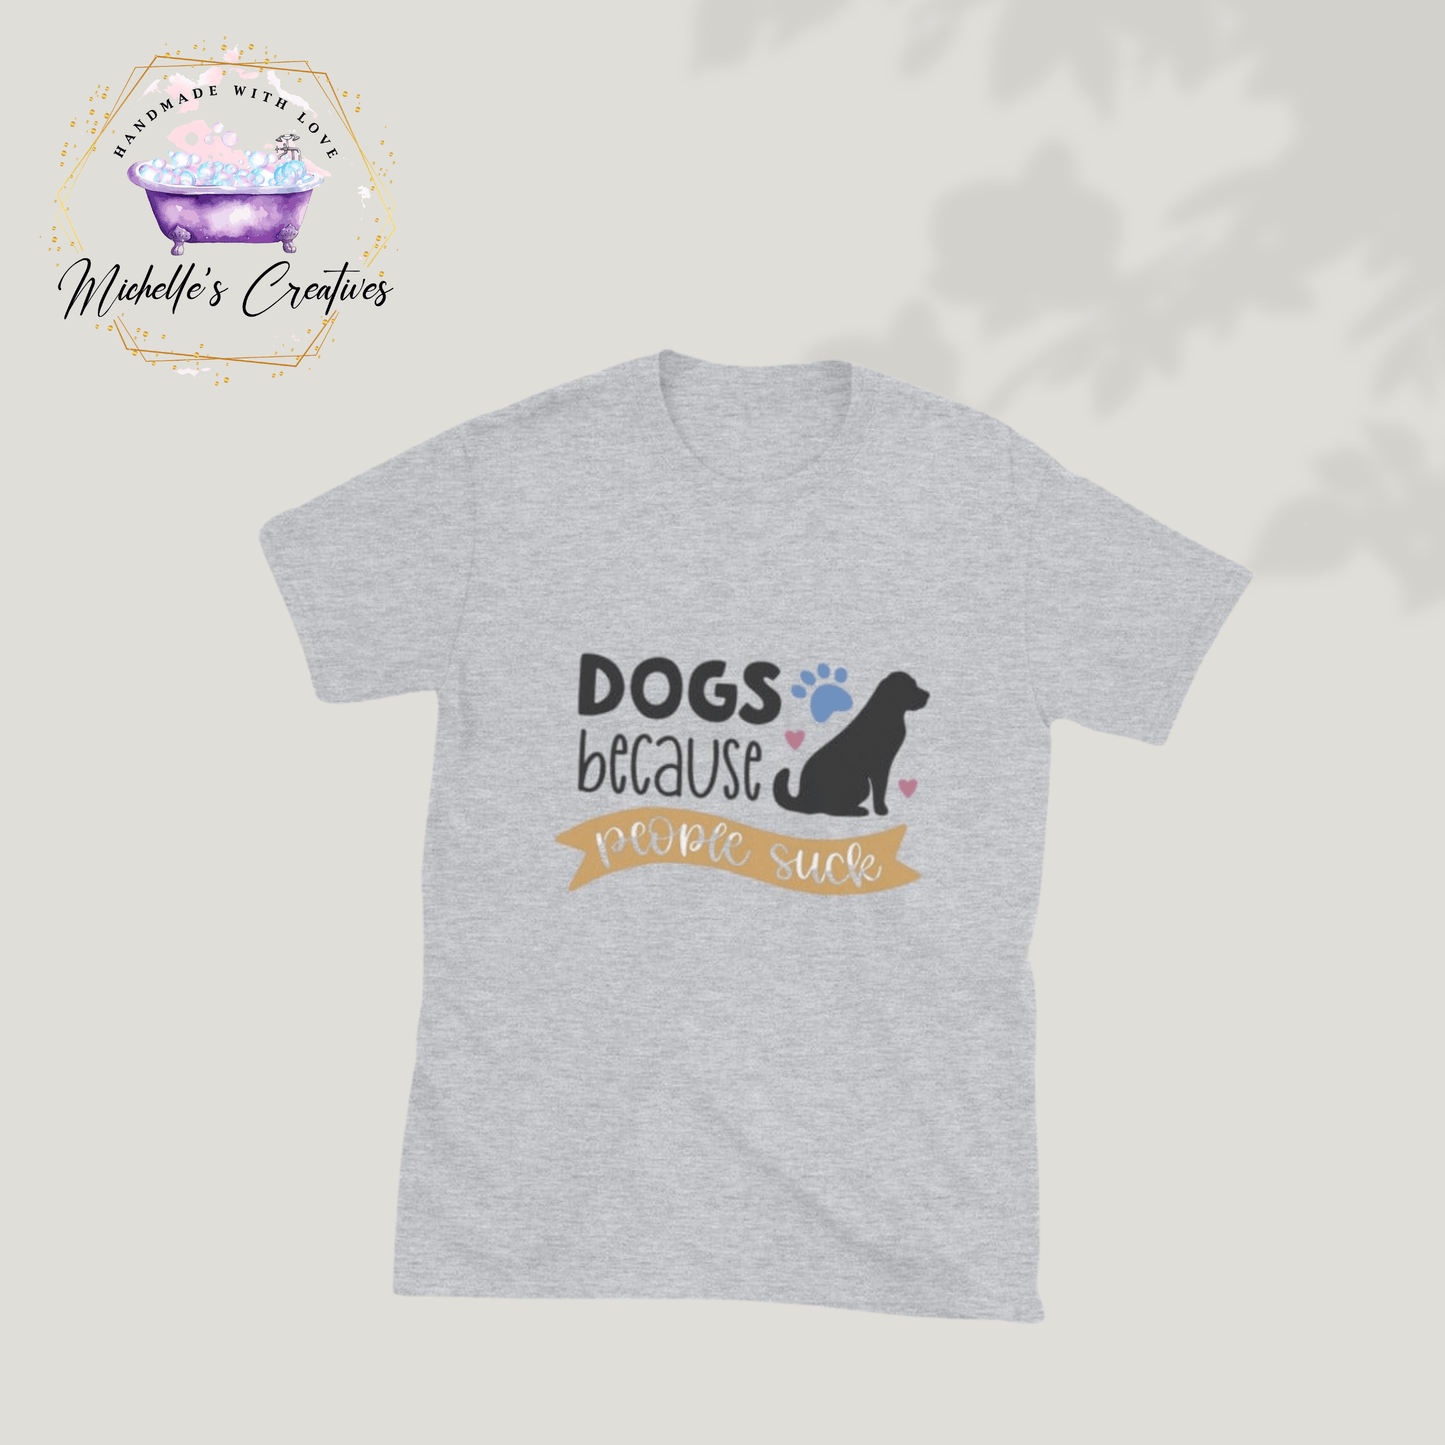 Michelle's Creatives Sport Grey / S Dogs Because People Suck Short-Sleeve Unisex T-Shirt 6395807_503